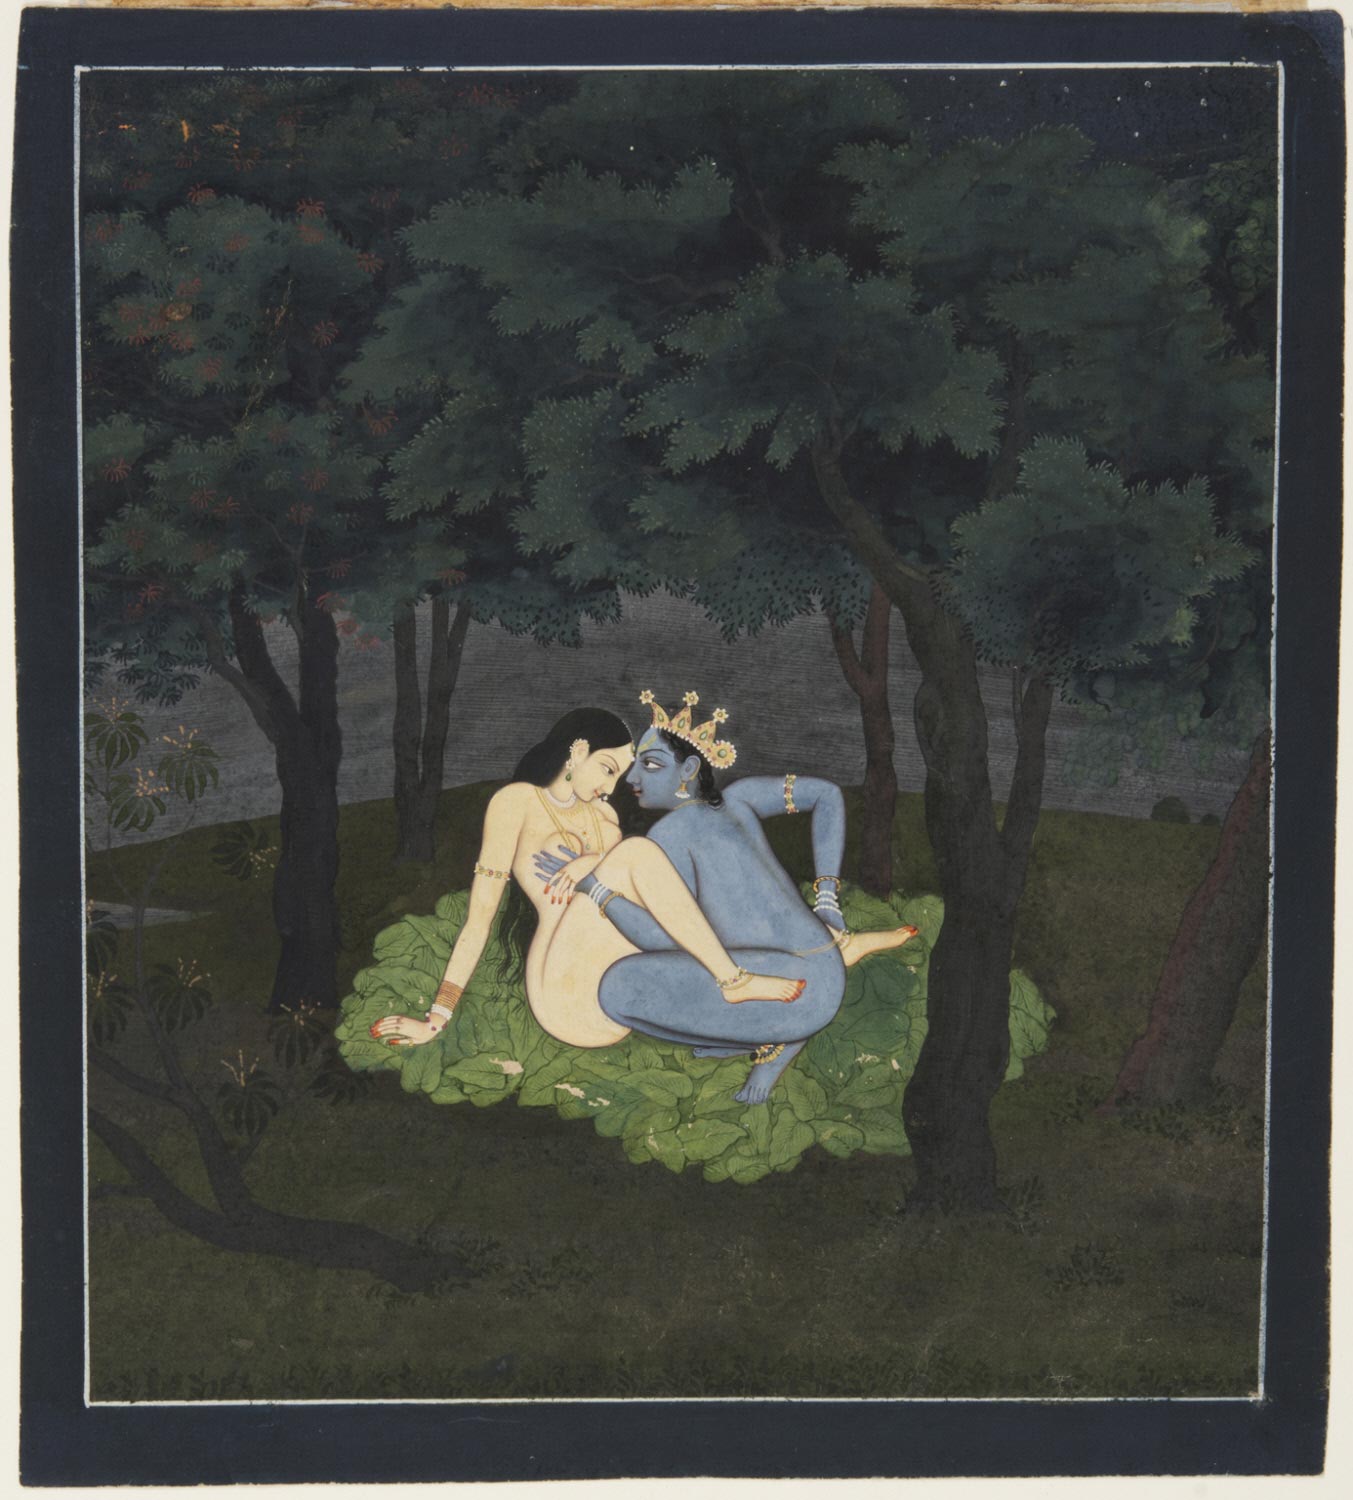 Radha and Krishna in their Forest Love Nest - Kangra or Guler Painting, Late 18th Century